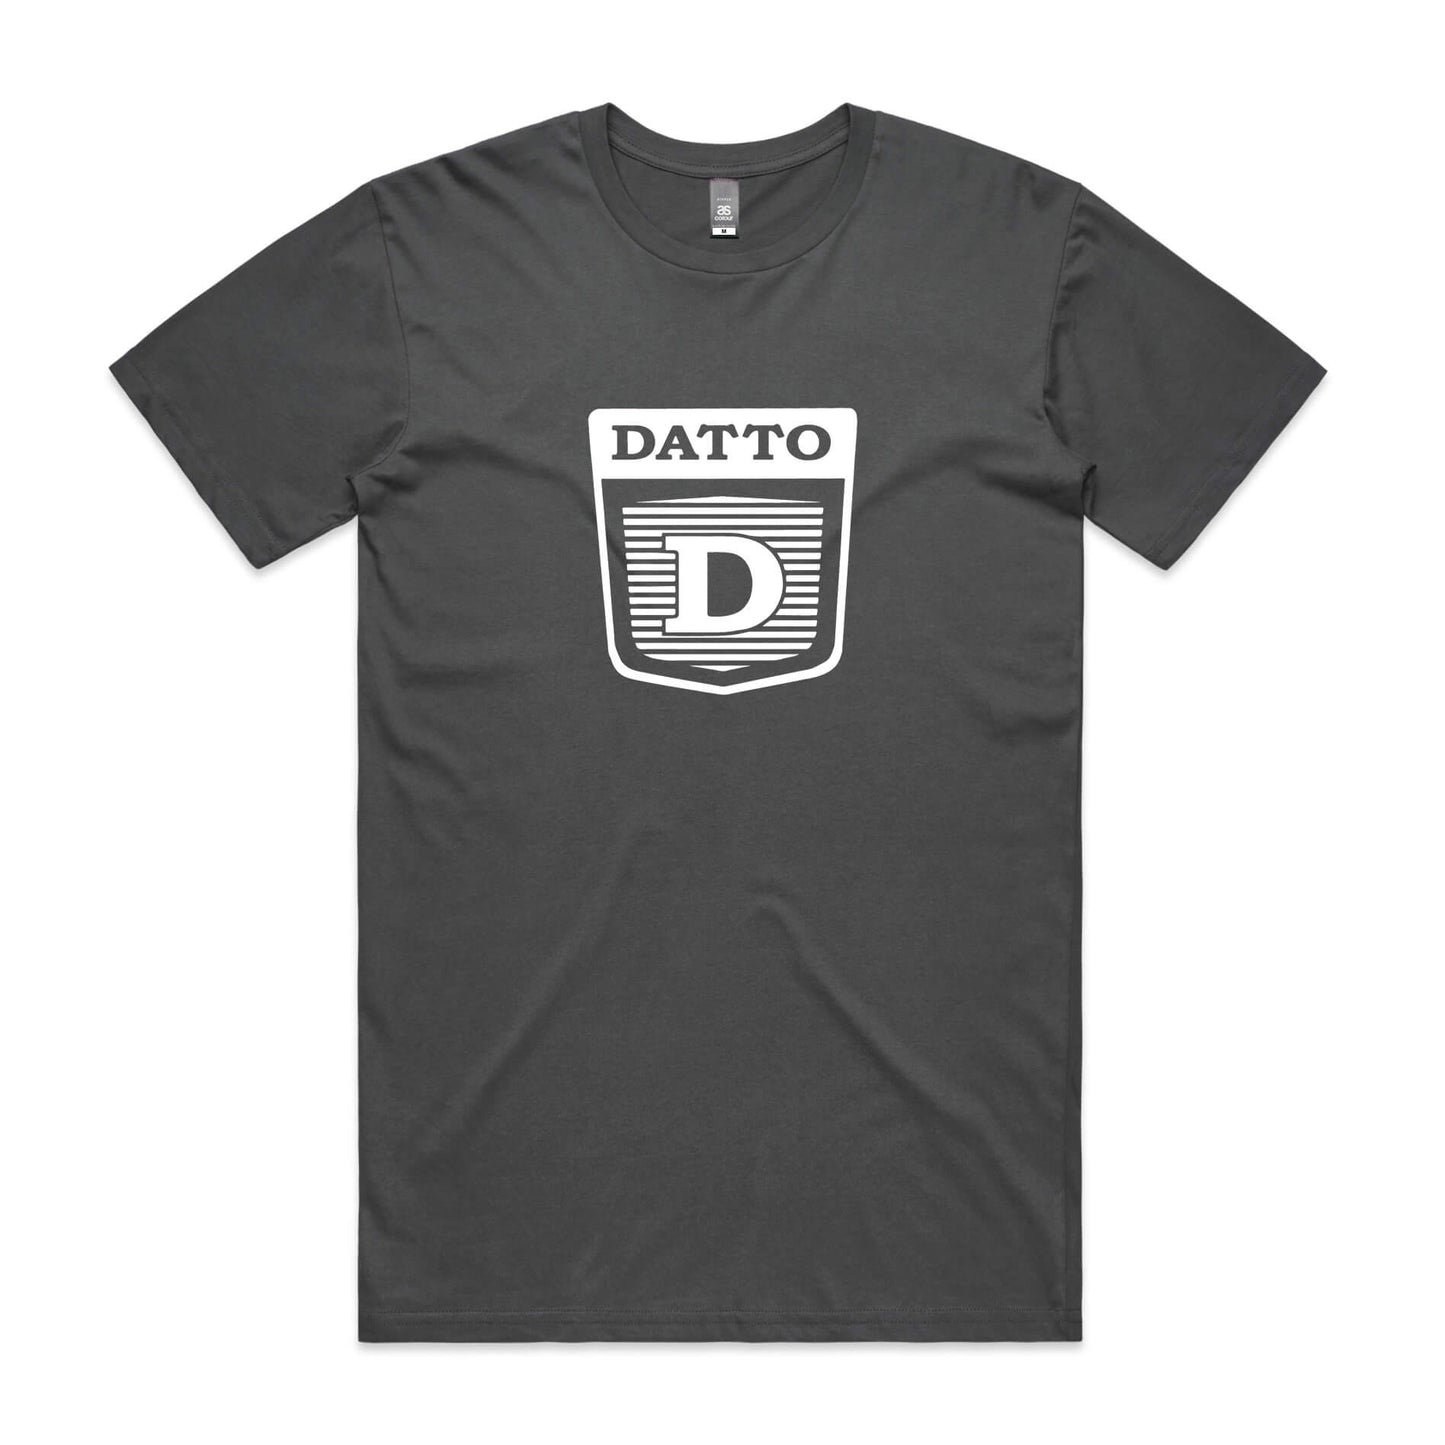 Datto t-shirt in charcoal grey with white logo